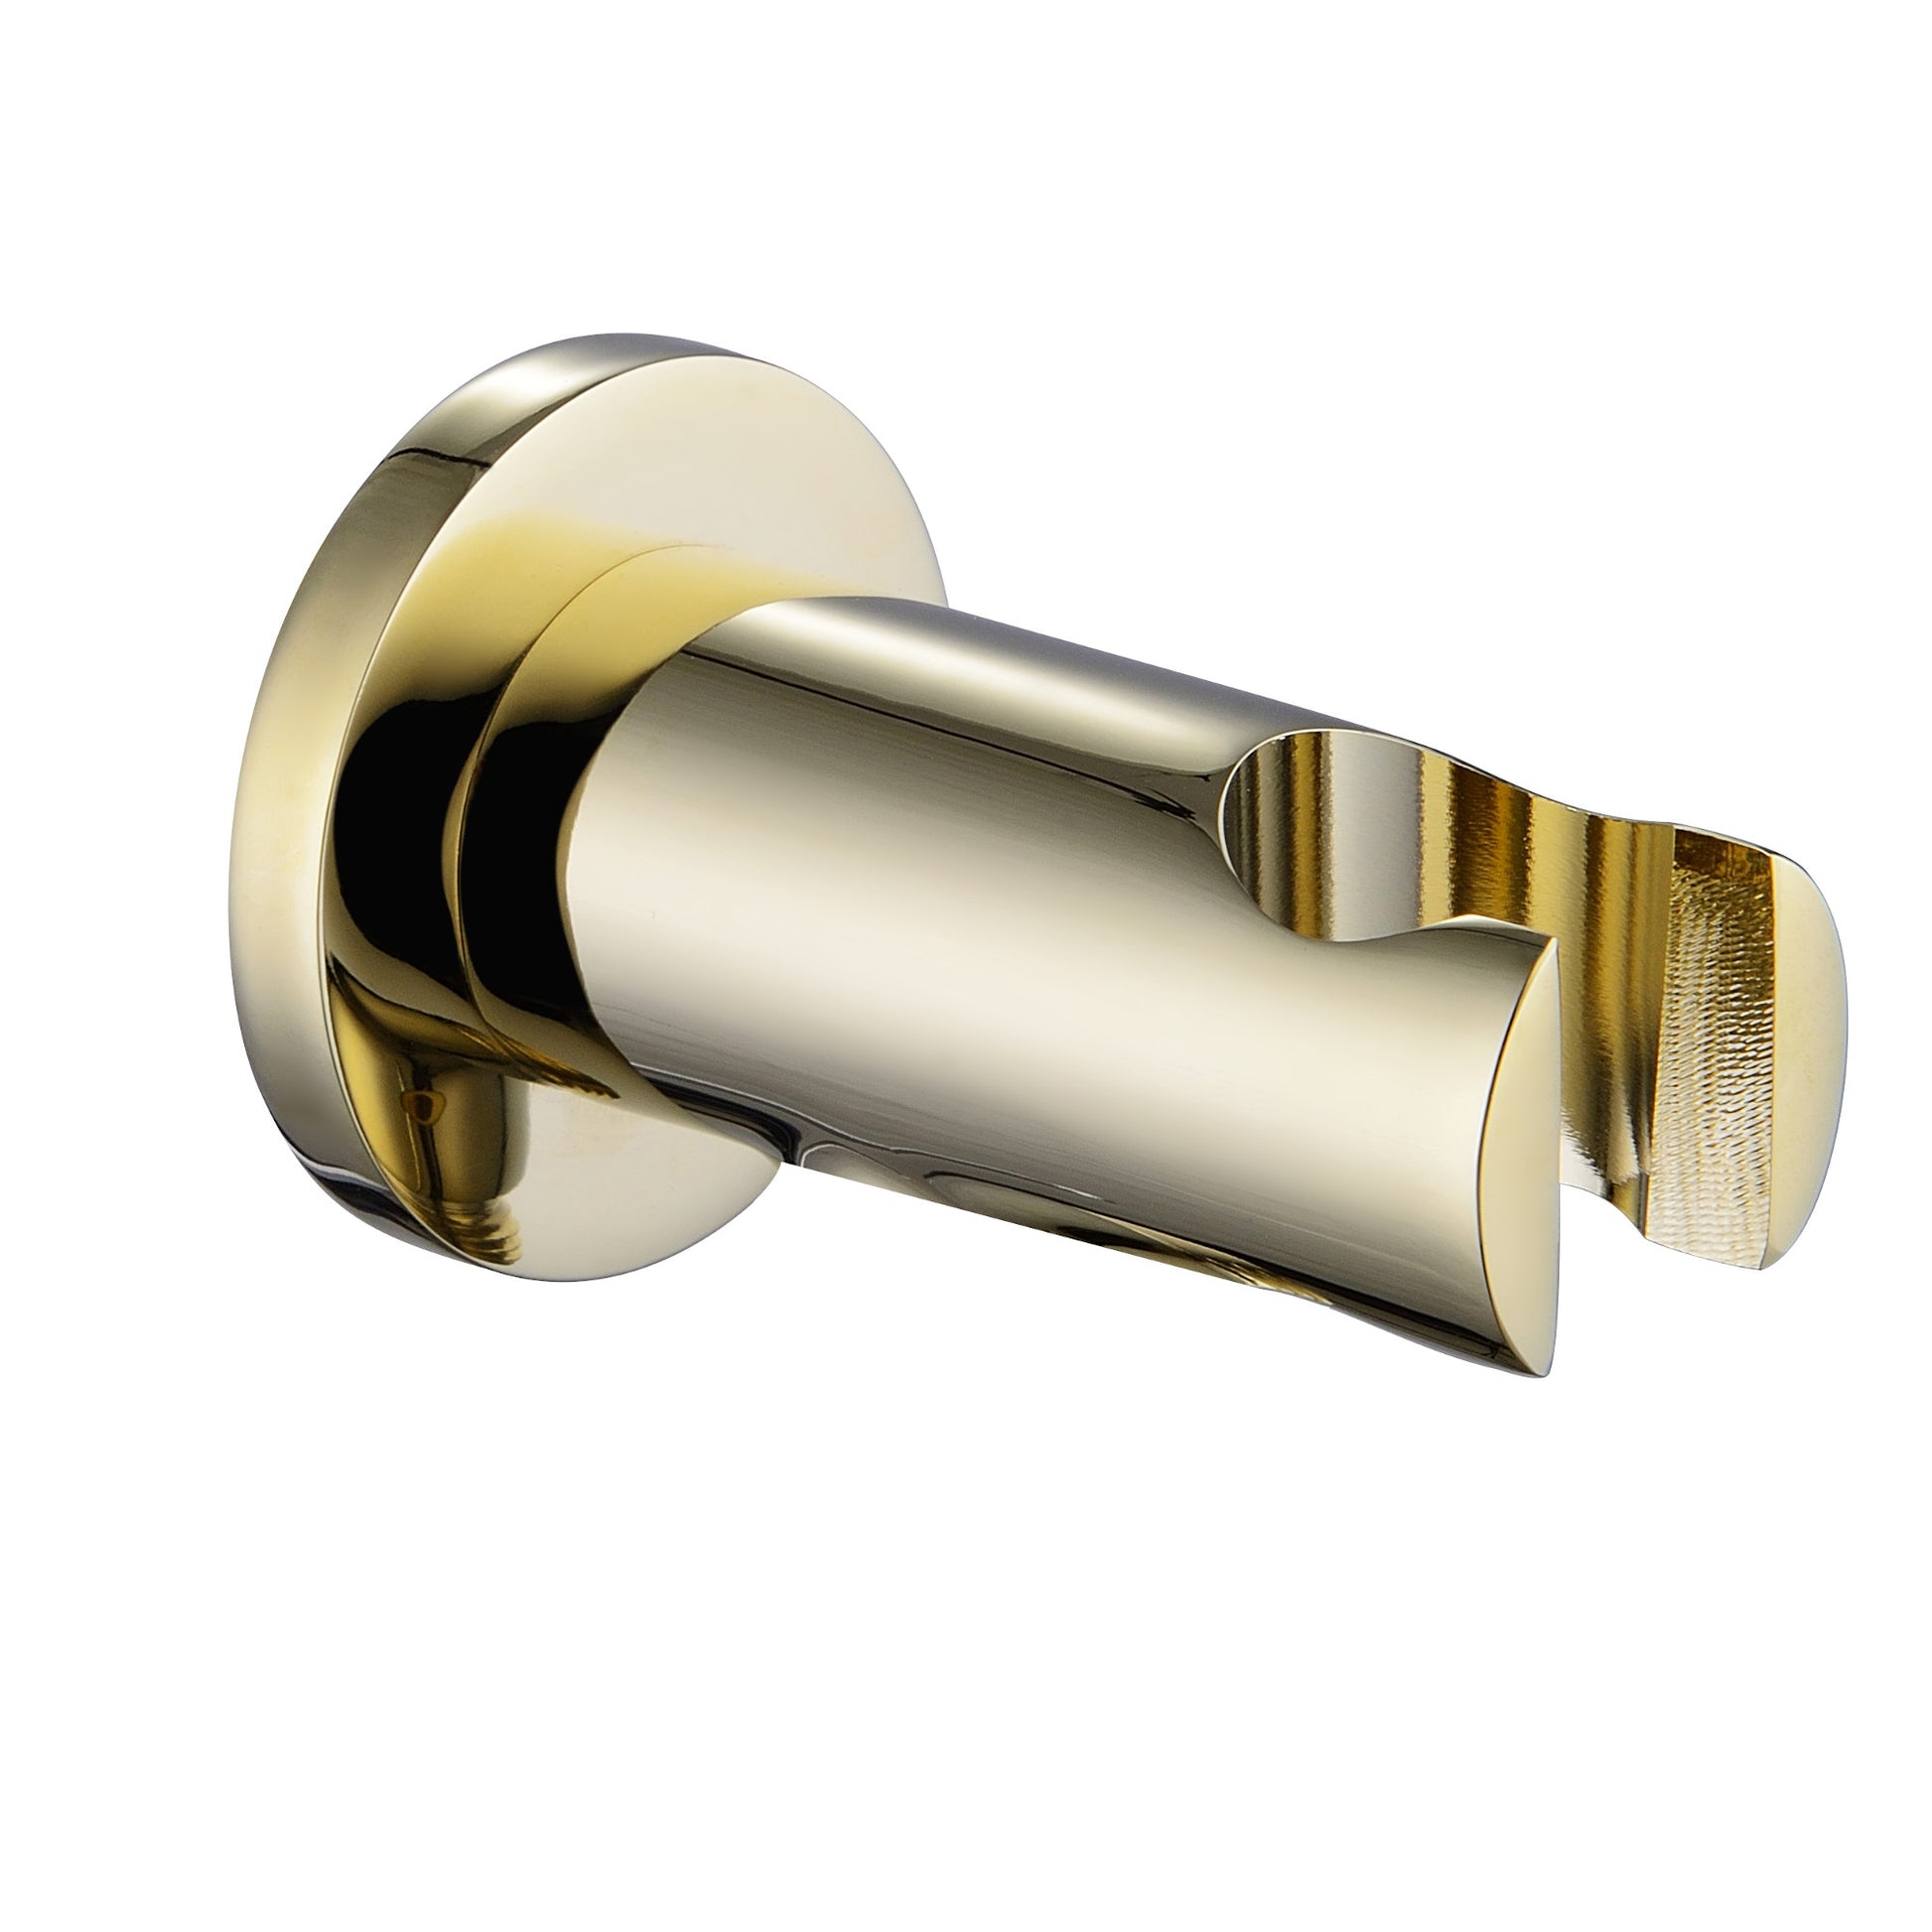 Round wall bracket for shower heads solid brass - English gold - Showers